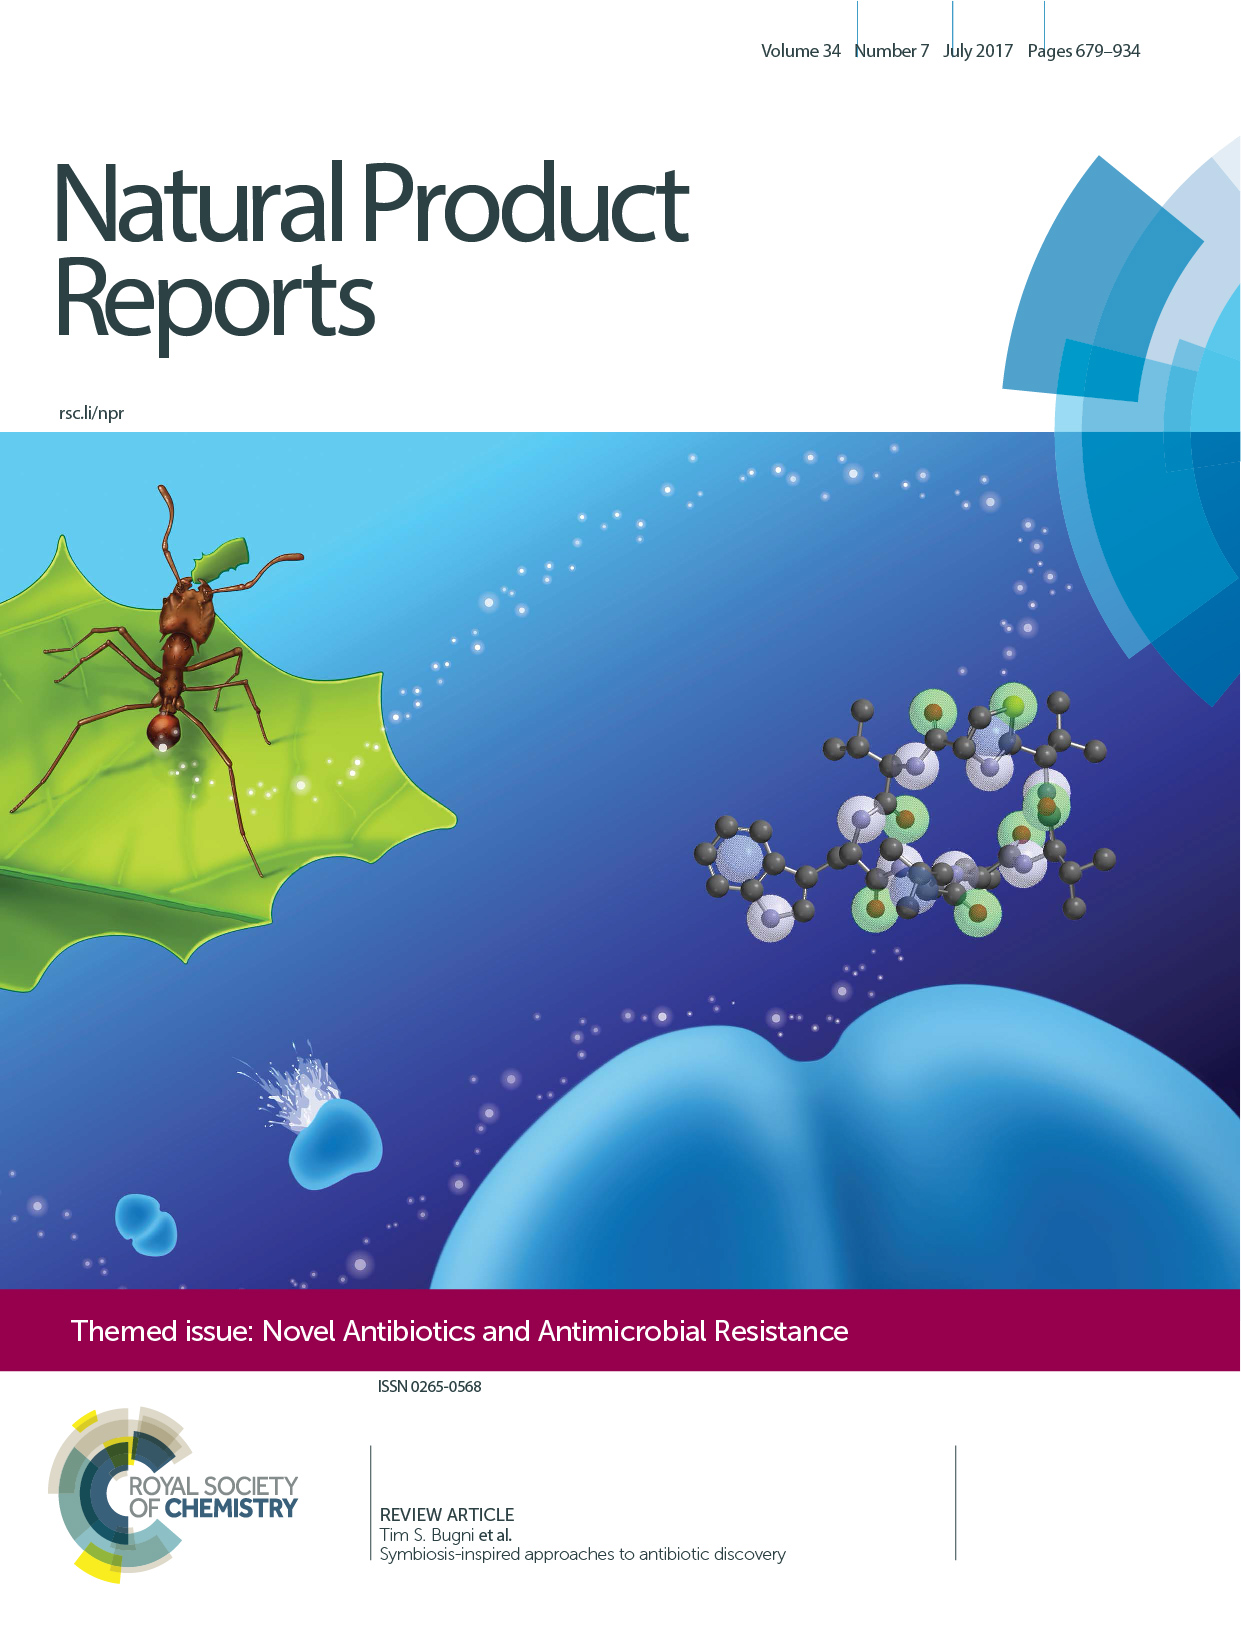 Natural Product Reports journal Volume 34 number 7 cover